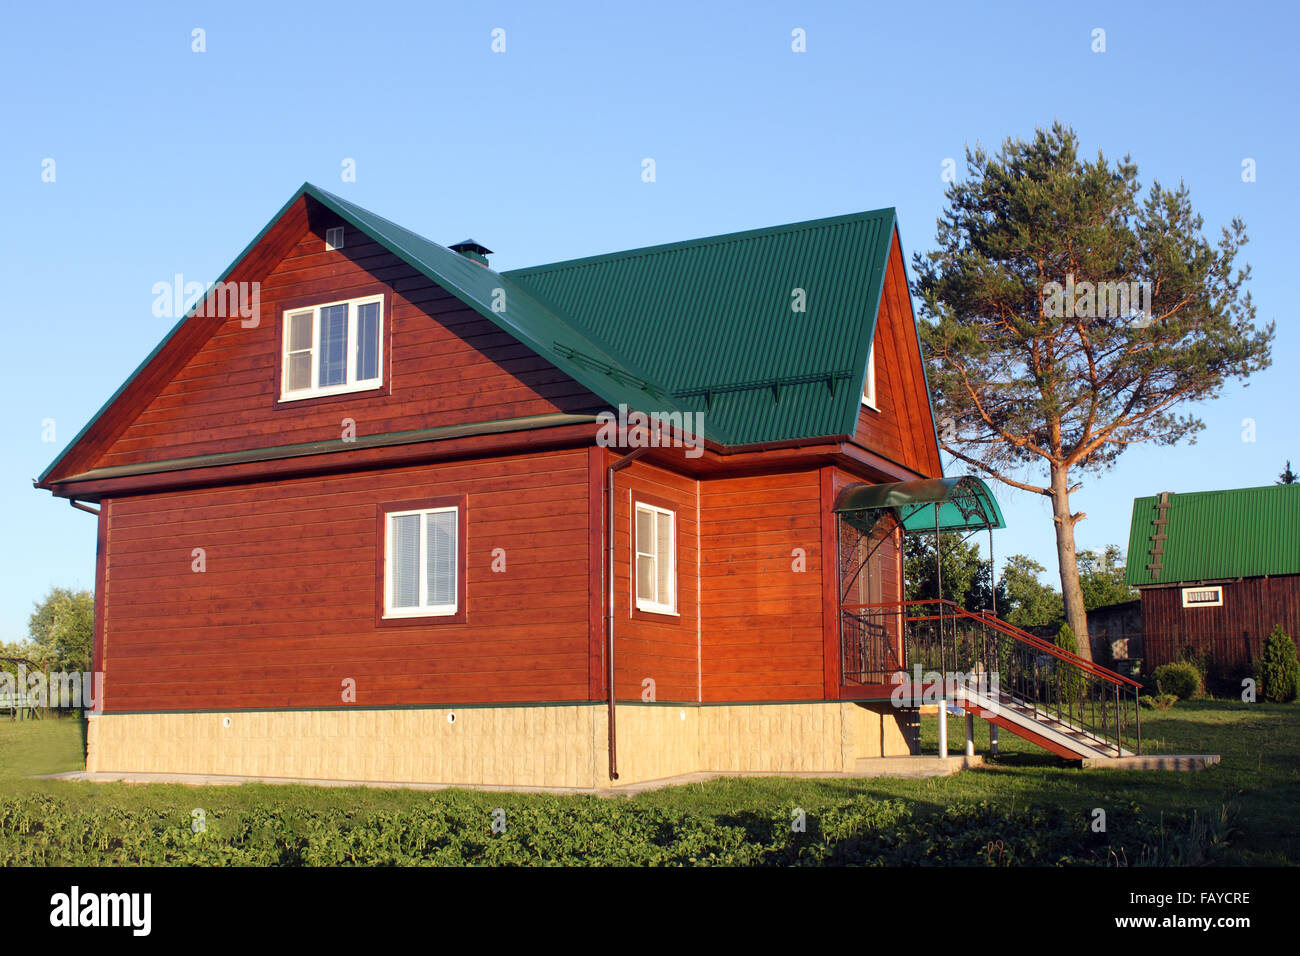 Wooden house under green metal roof photo Stock Photo